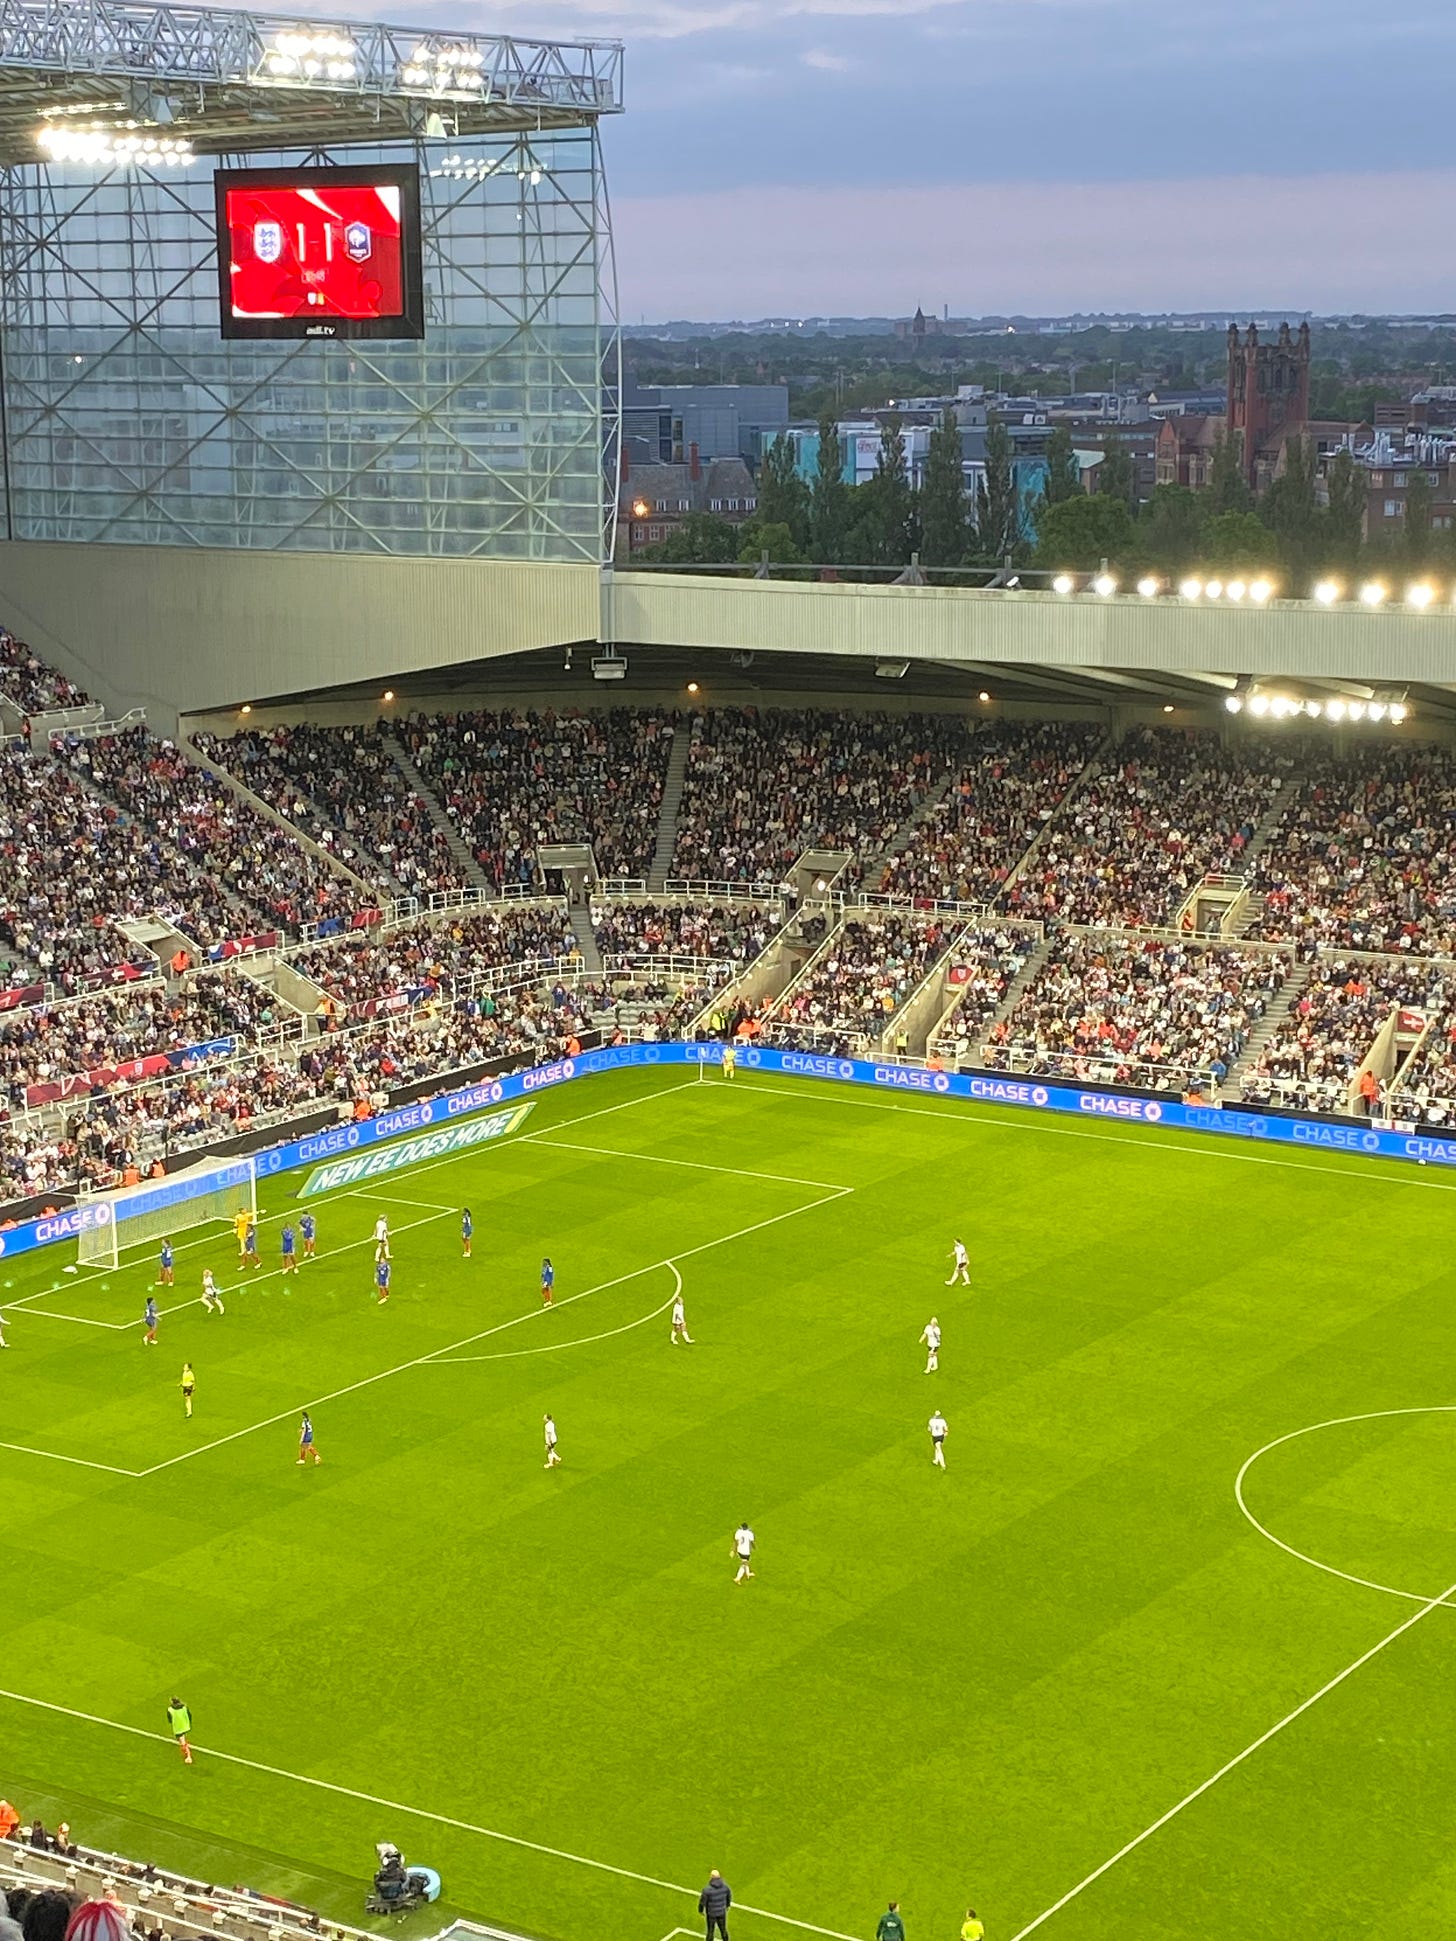 A view of the pitch at St. James' Park, the England-France game in progress, with the scoreboard behind it, reading 1-1. It's dusk and the floodlights are on.